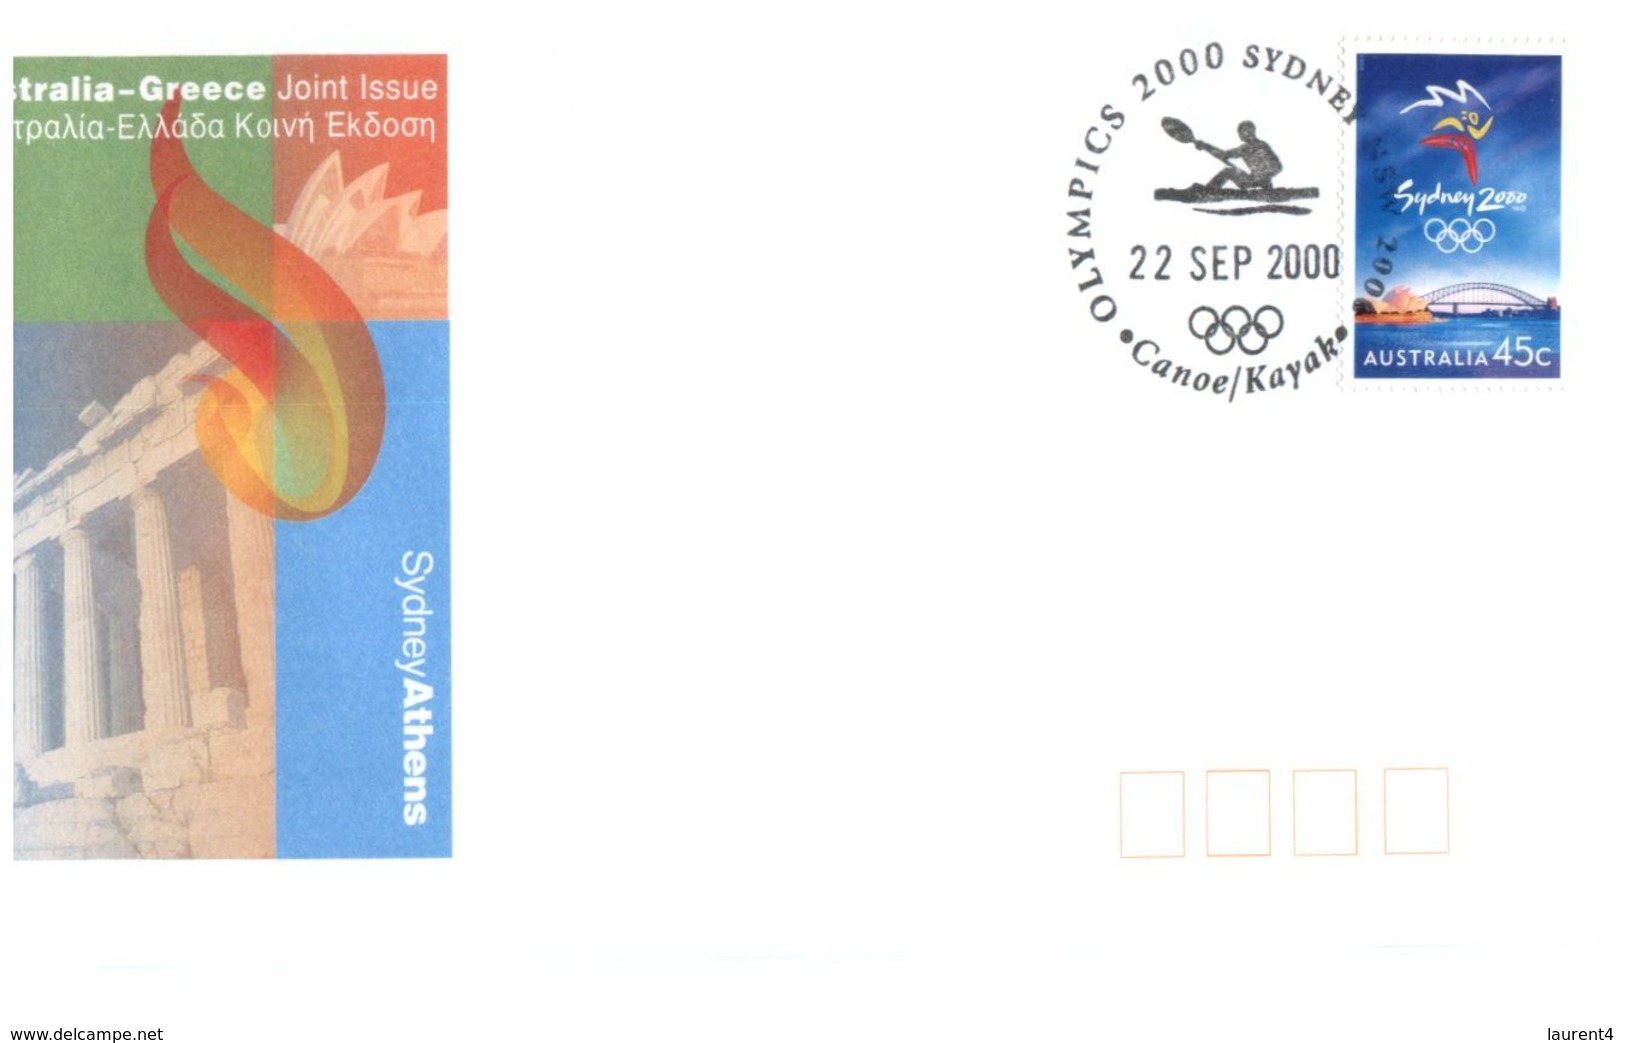 (C 4) Australia - 2000 Olympic Games - set of11 sports cancelled on 22 September 2000